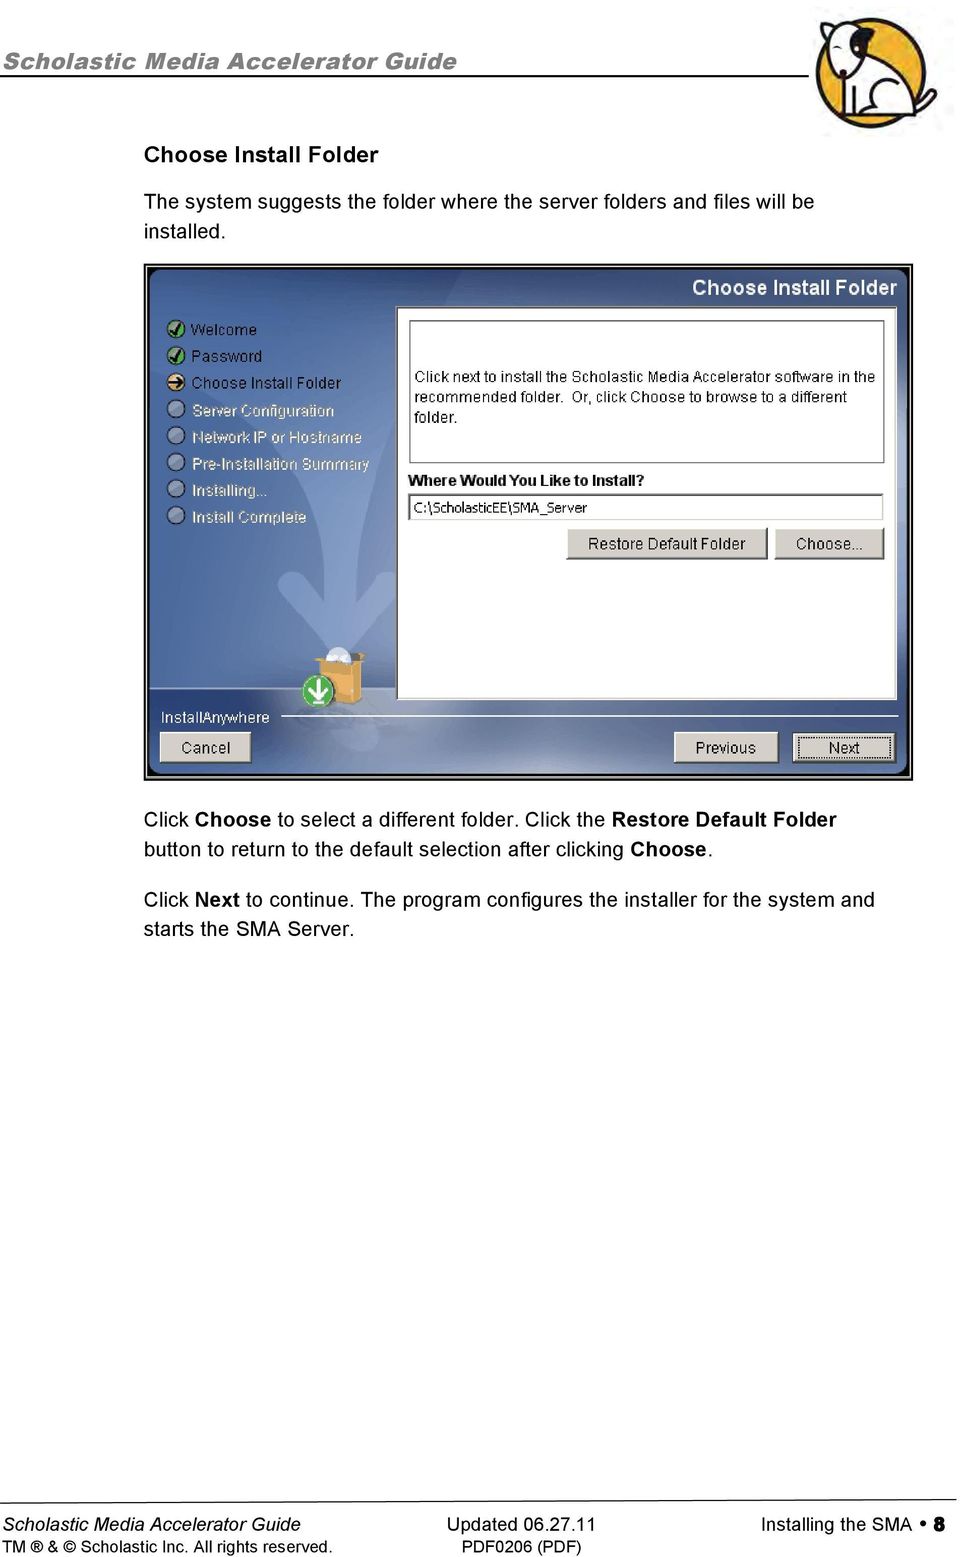 Click the Restore Default Folder button to return to the default selection after clicking Choose.